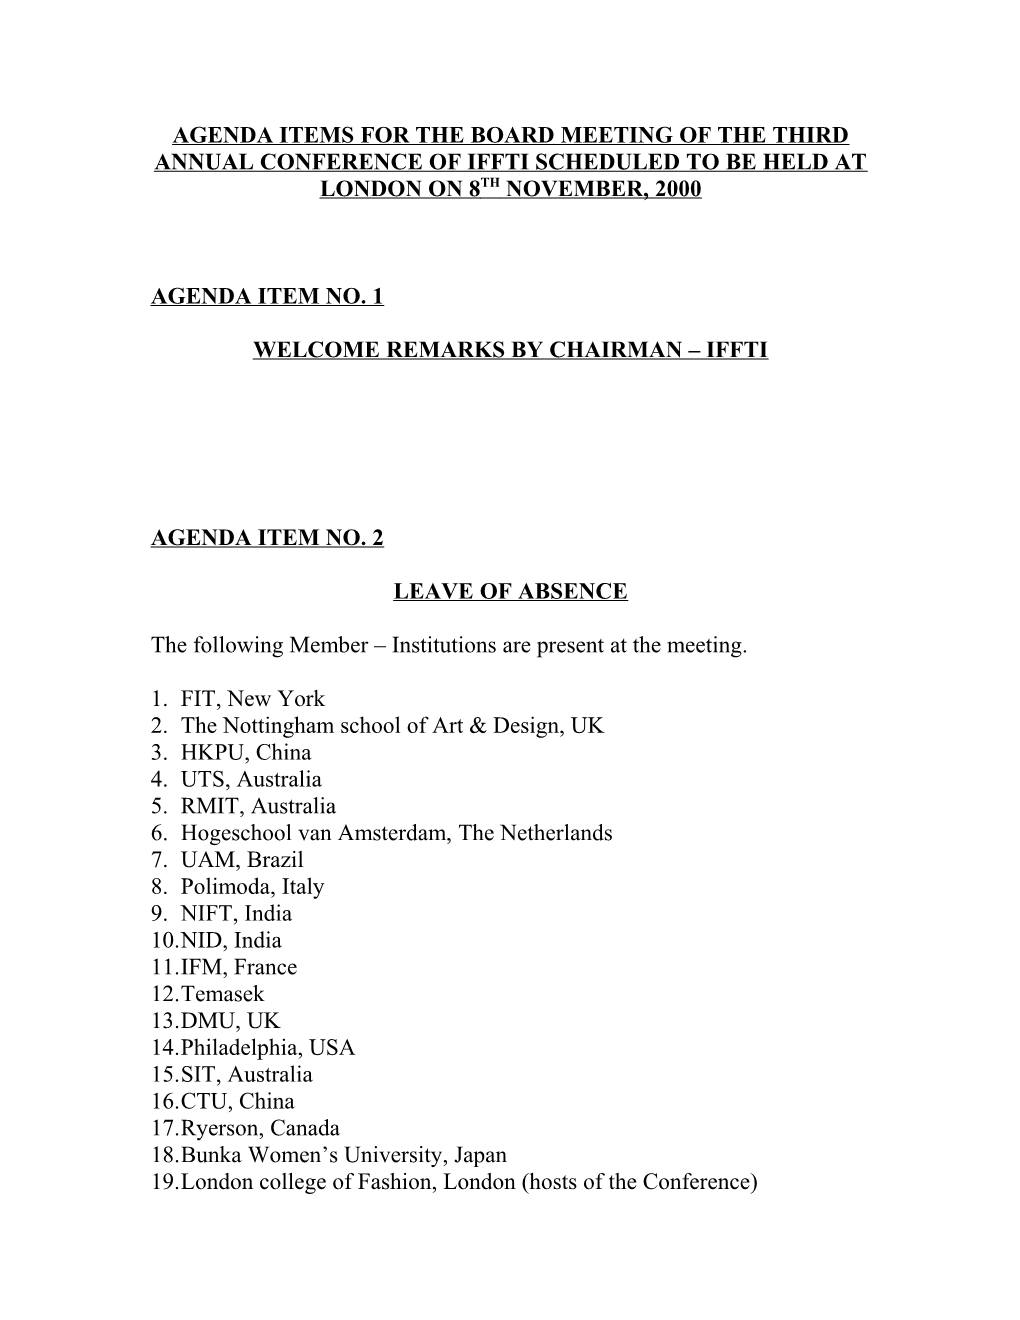 Agenda Items for the Board Meeting of the Third Annual Conference of Iffti Scheduled To